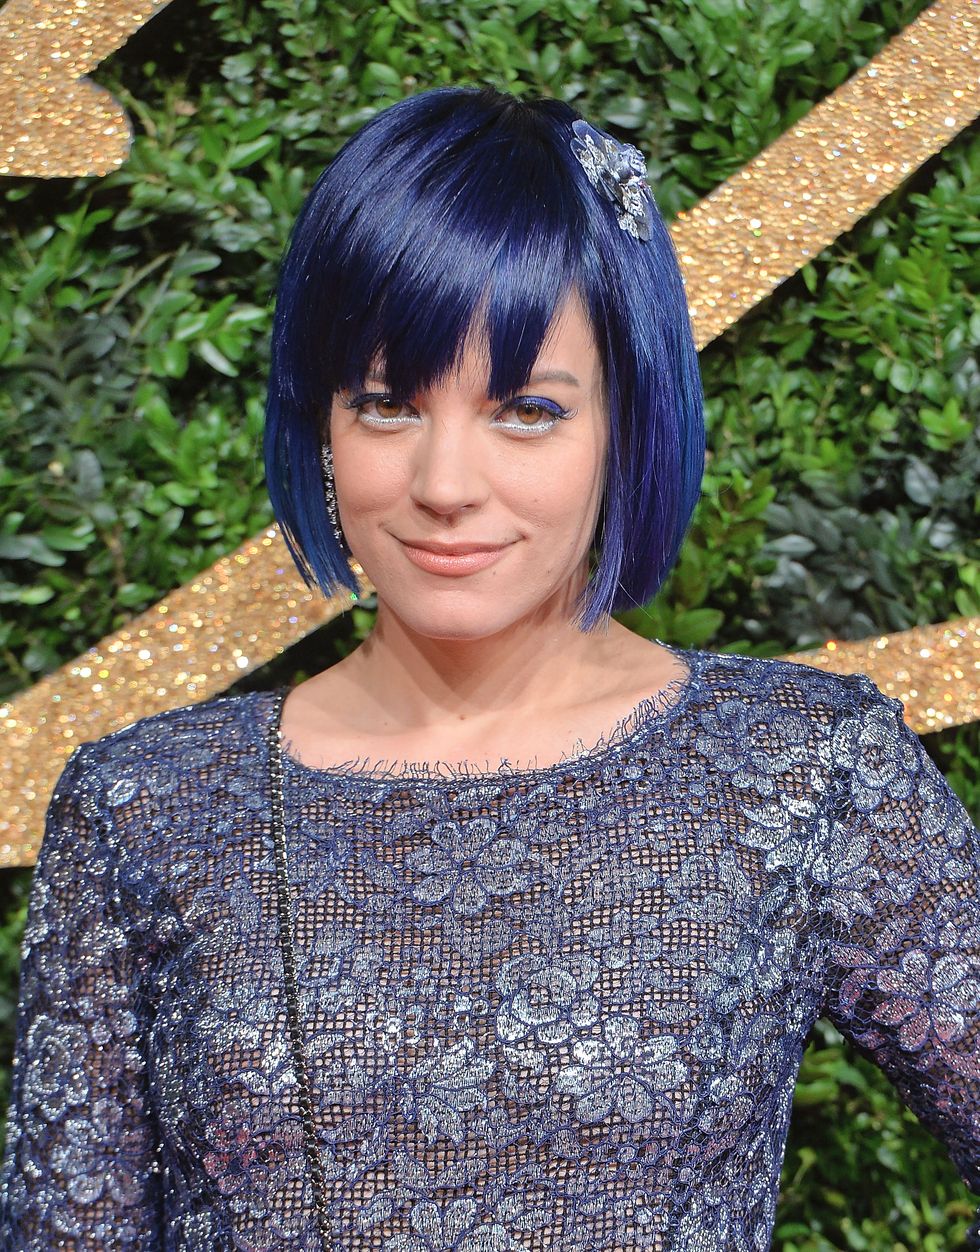 Lily Allen's blue hair and makeup combo